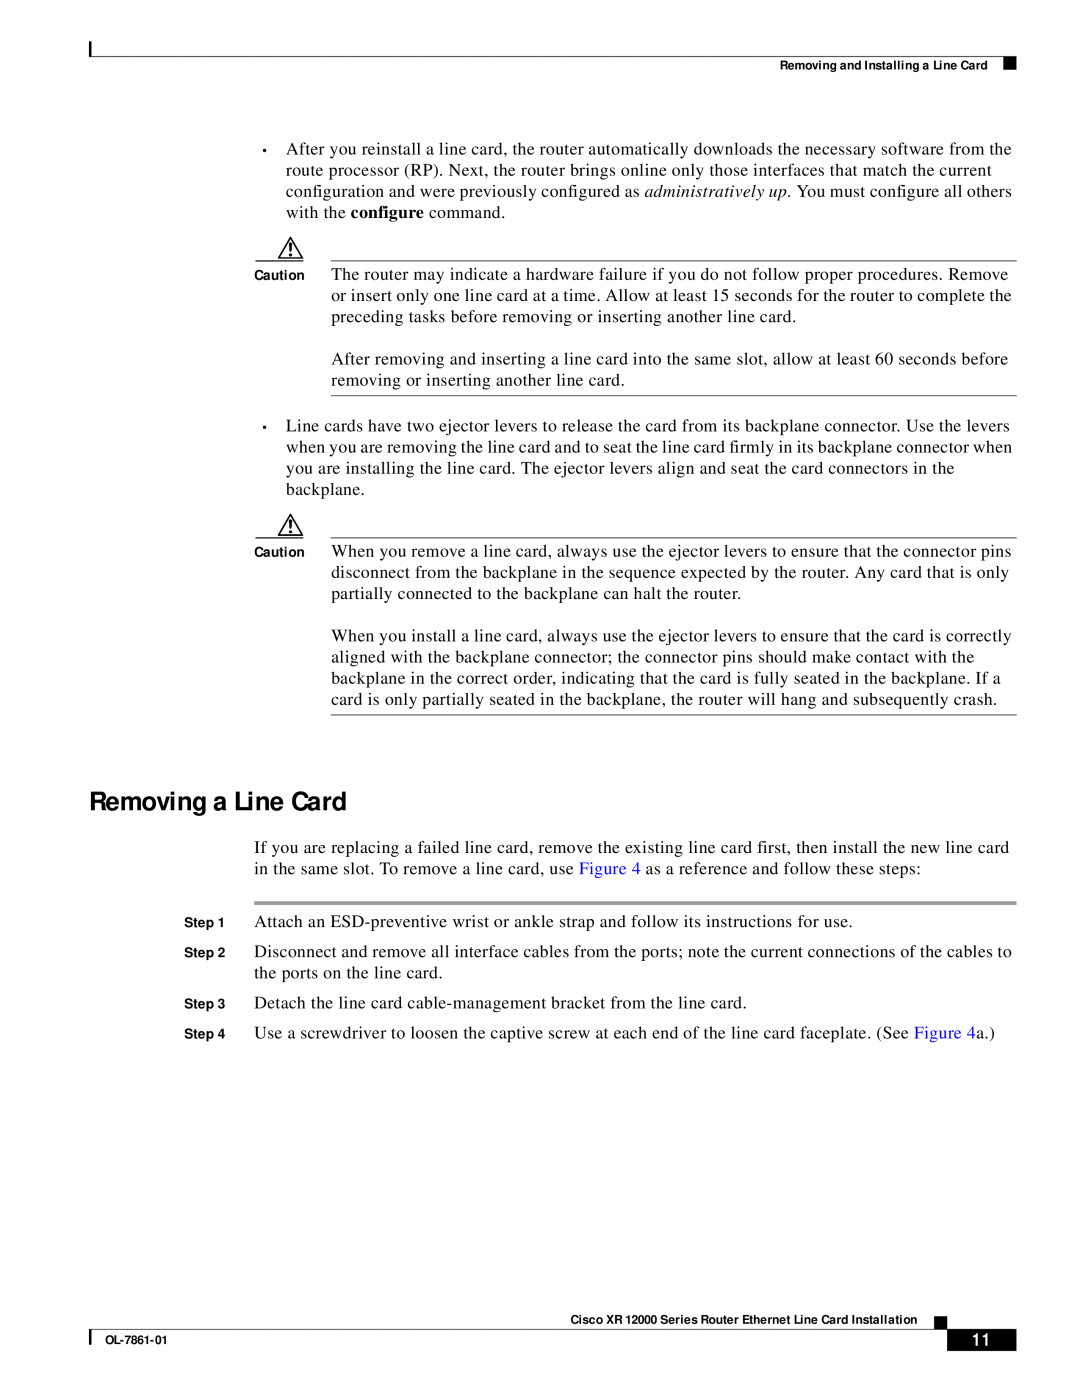 Cisco Systems OL-7861-01 manual Removing a Line Card 